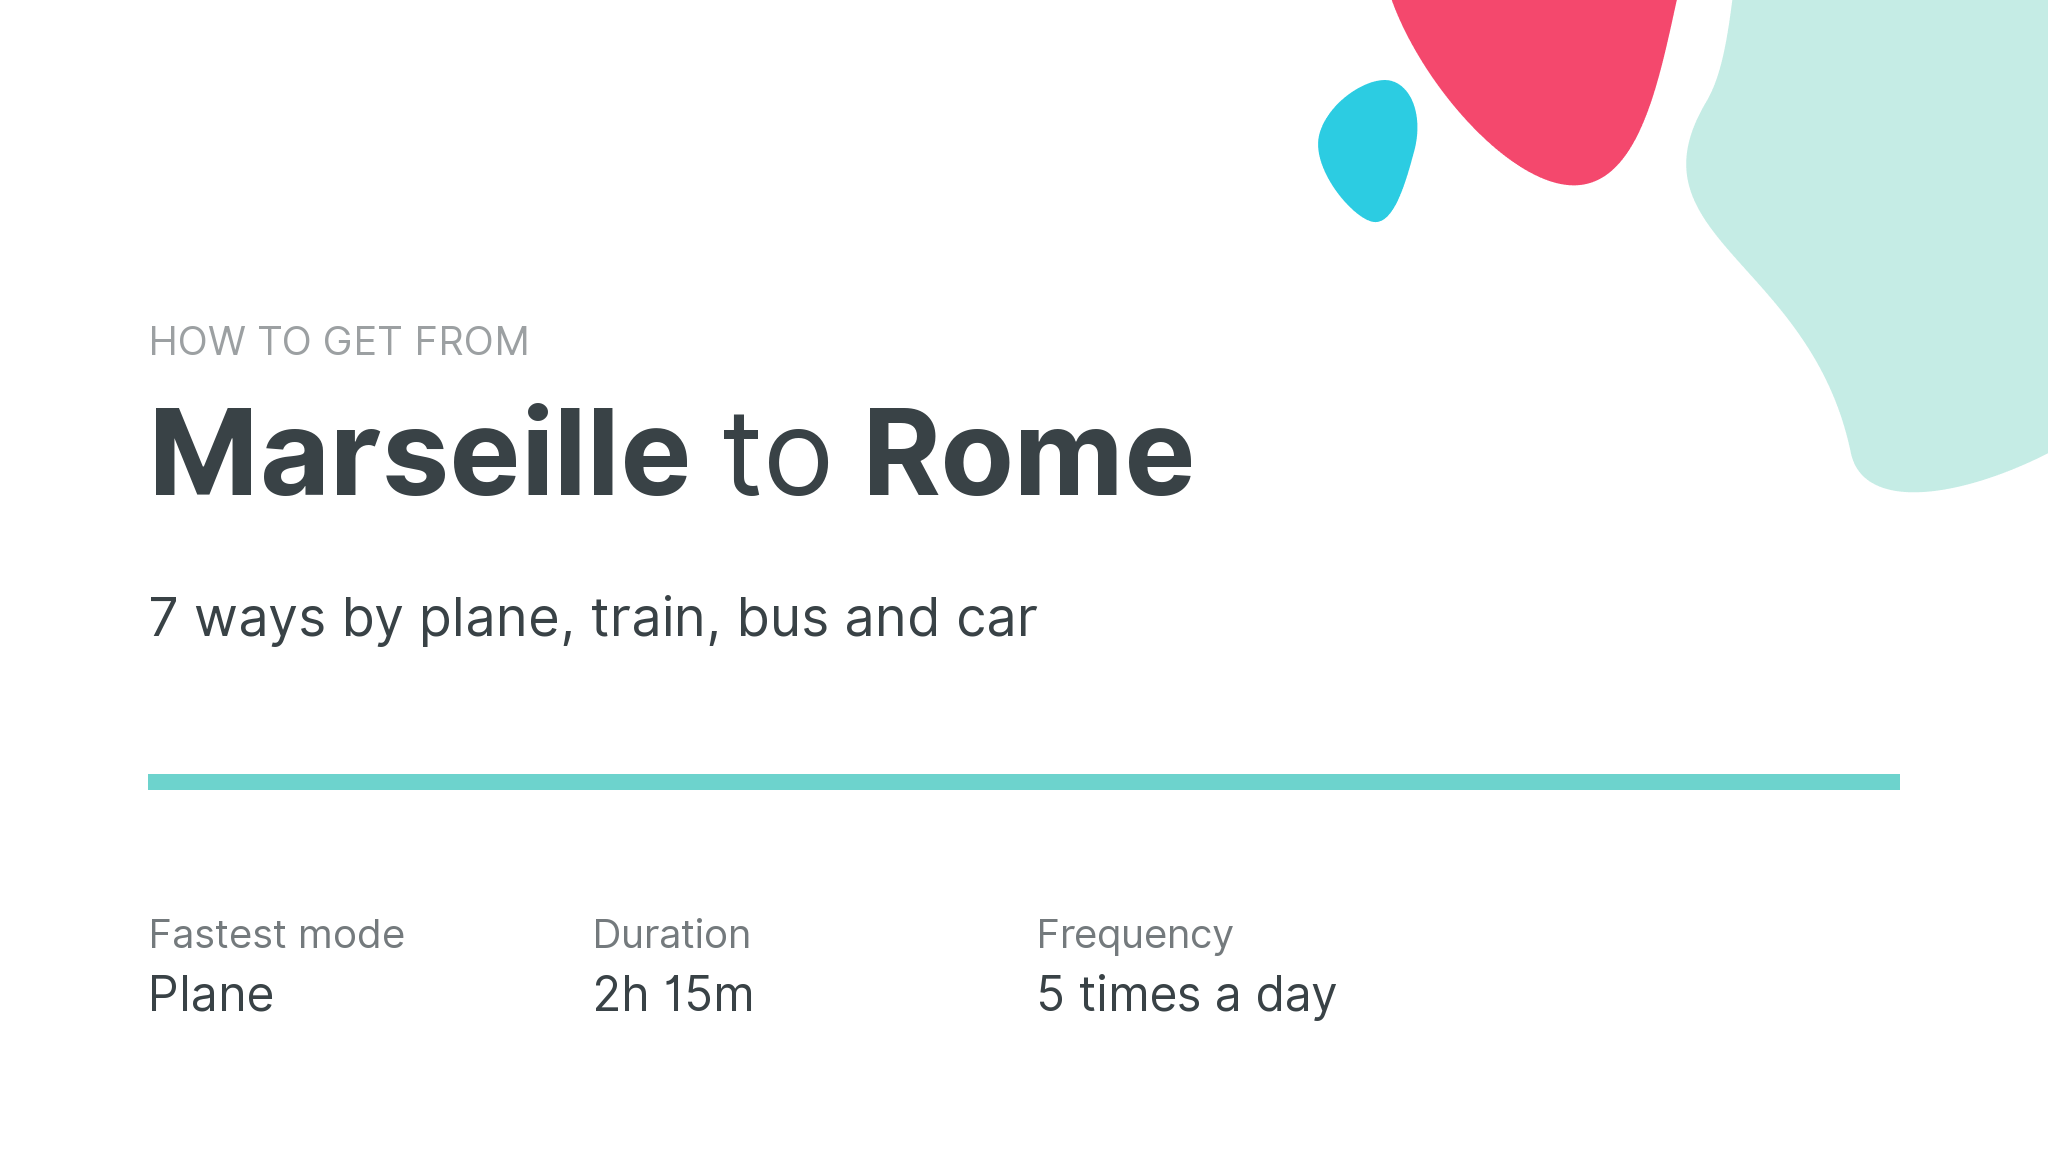 How do I get from Marseille to Rome